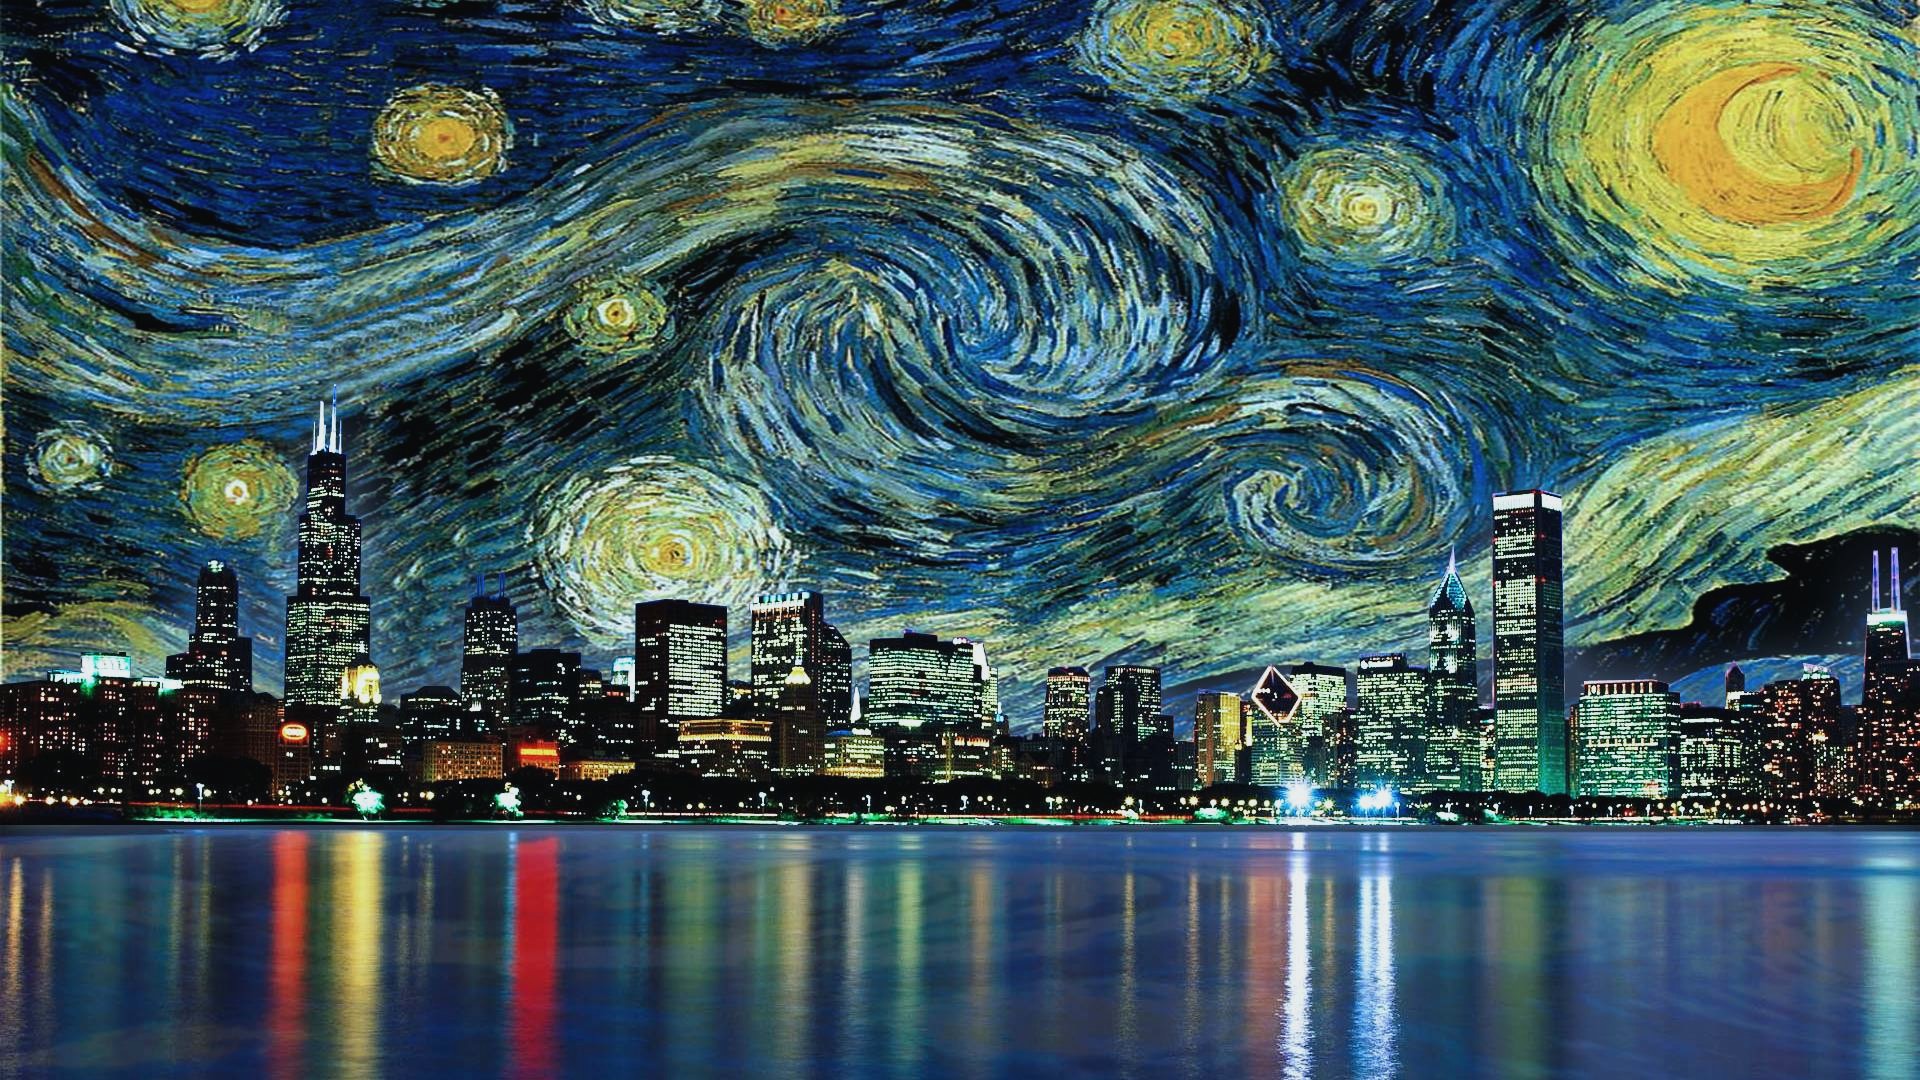 Wallpaper* City Guide On The App Store - Van Gogh Starry Night City , HD Wallpaper & Backgrounds